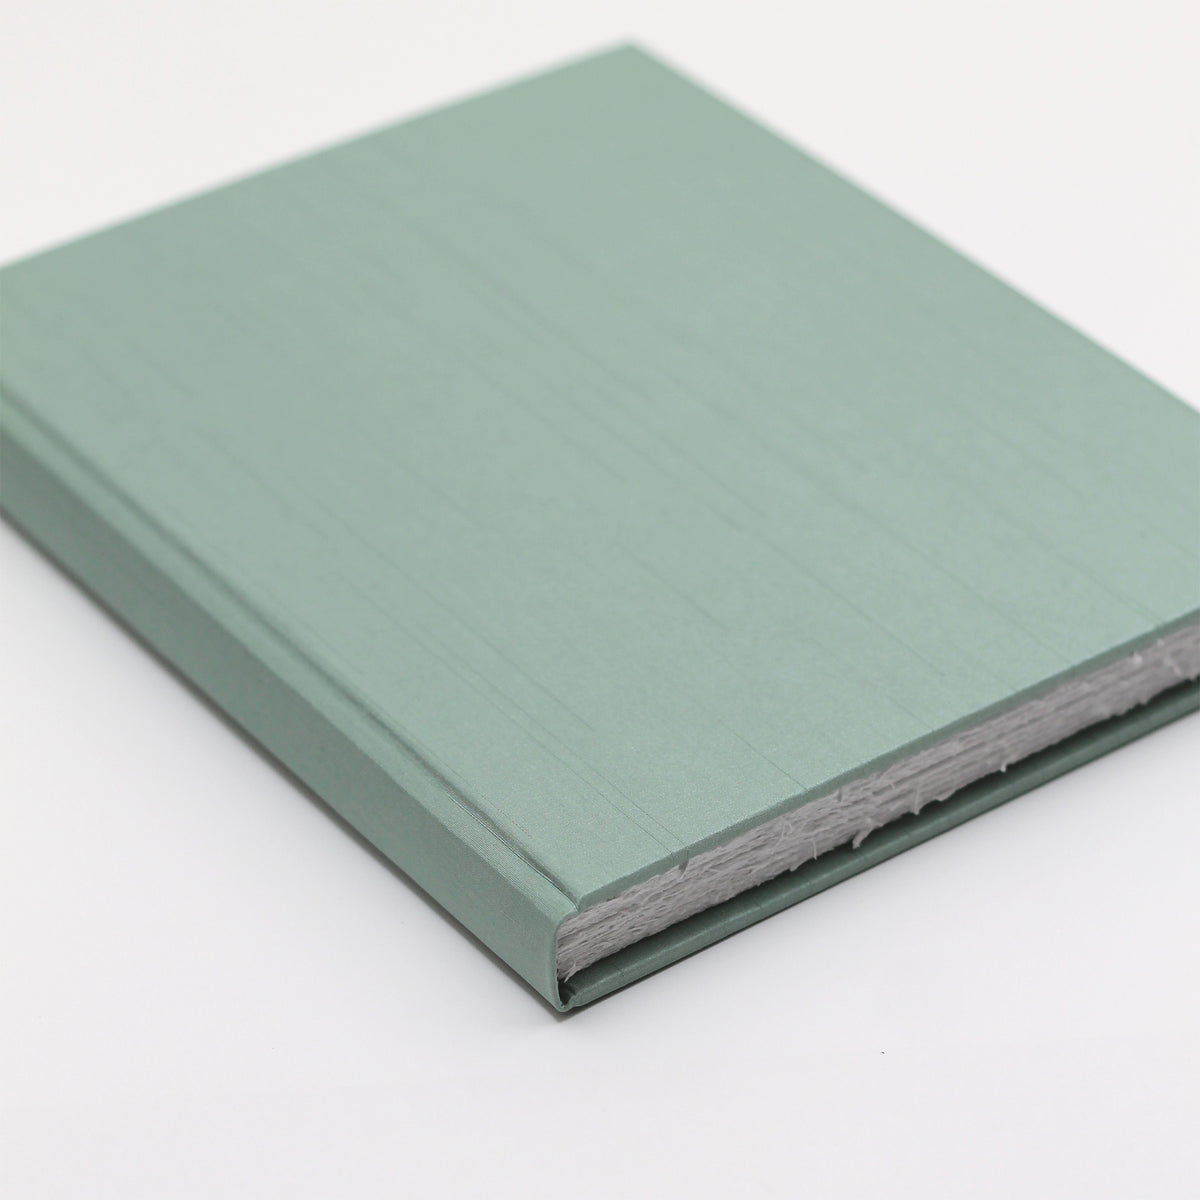 Large 8x10 Blank Page Journal | Cover: Misty Blue Silk | Available Personalized